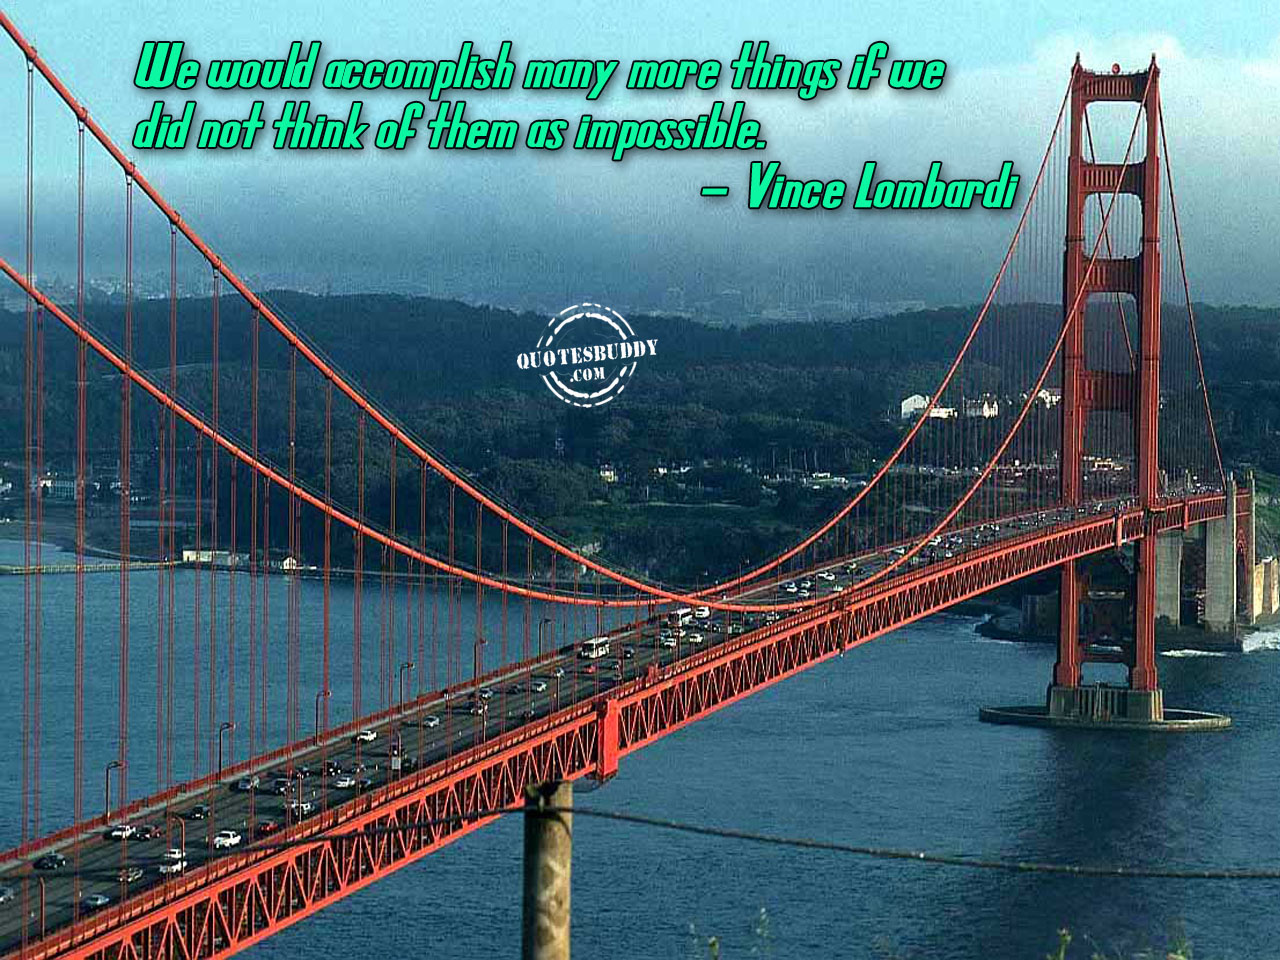 Vince Lombardi's quote #6